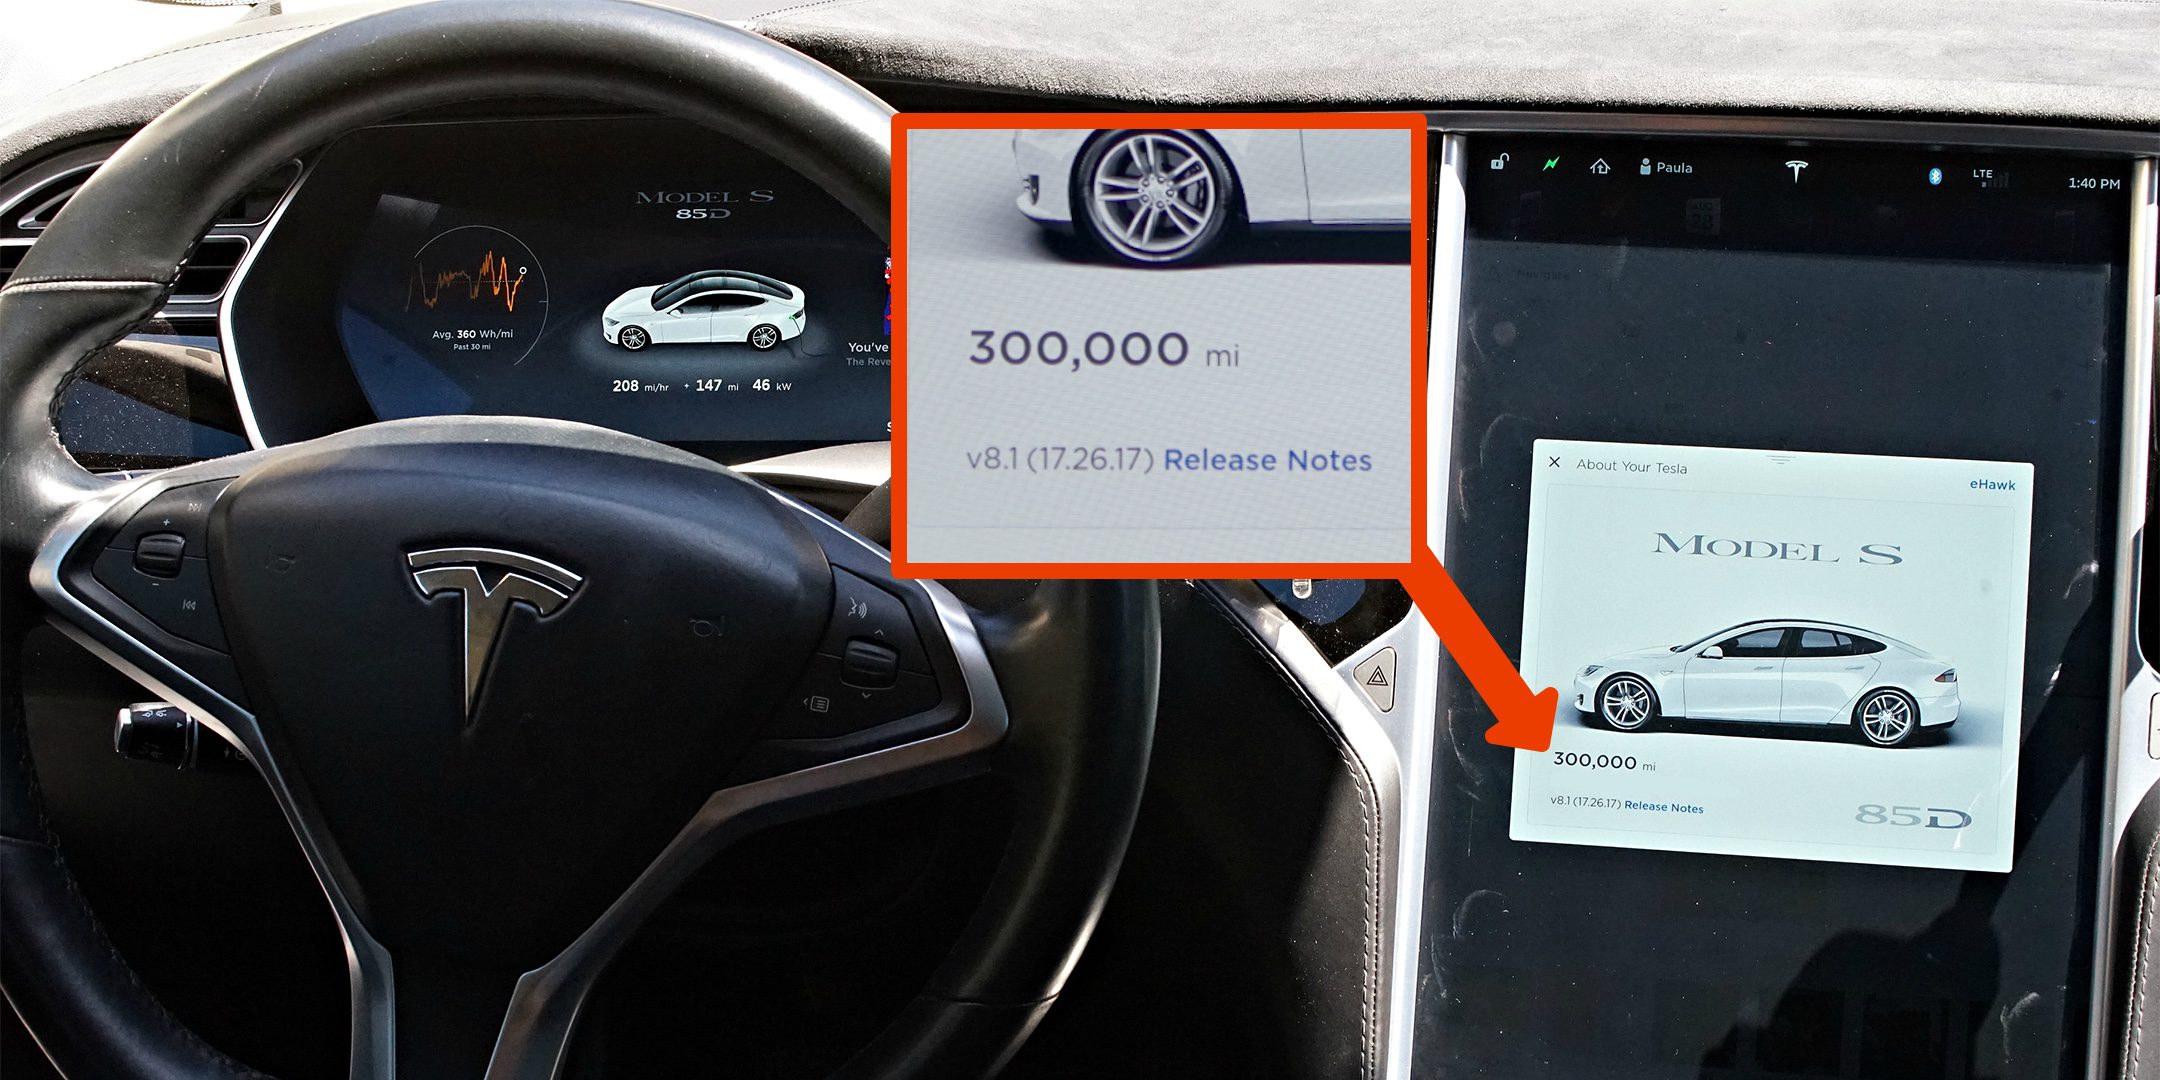 Reusachtig Hoofd Vriend A Tesla Model S hits 300,000 miles in just 2 years - saving an estimated  $60,000 on fuel and maintenance - Electrek